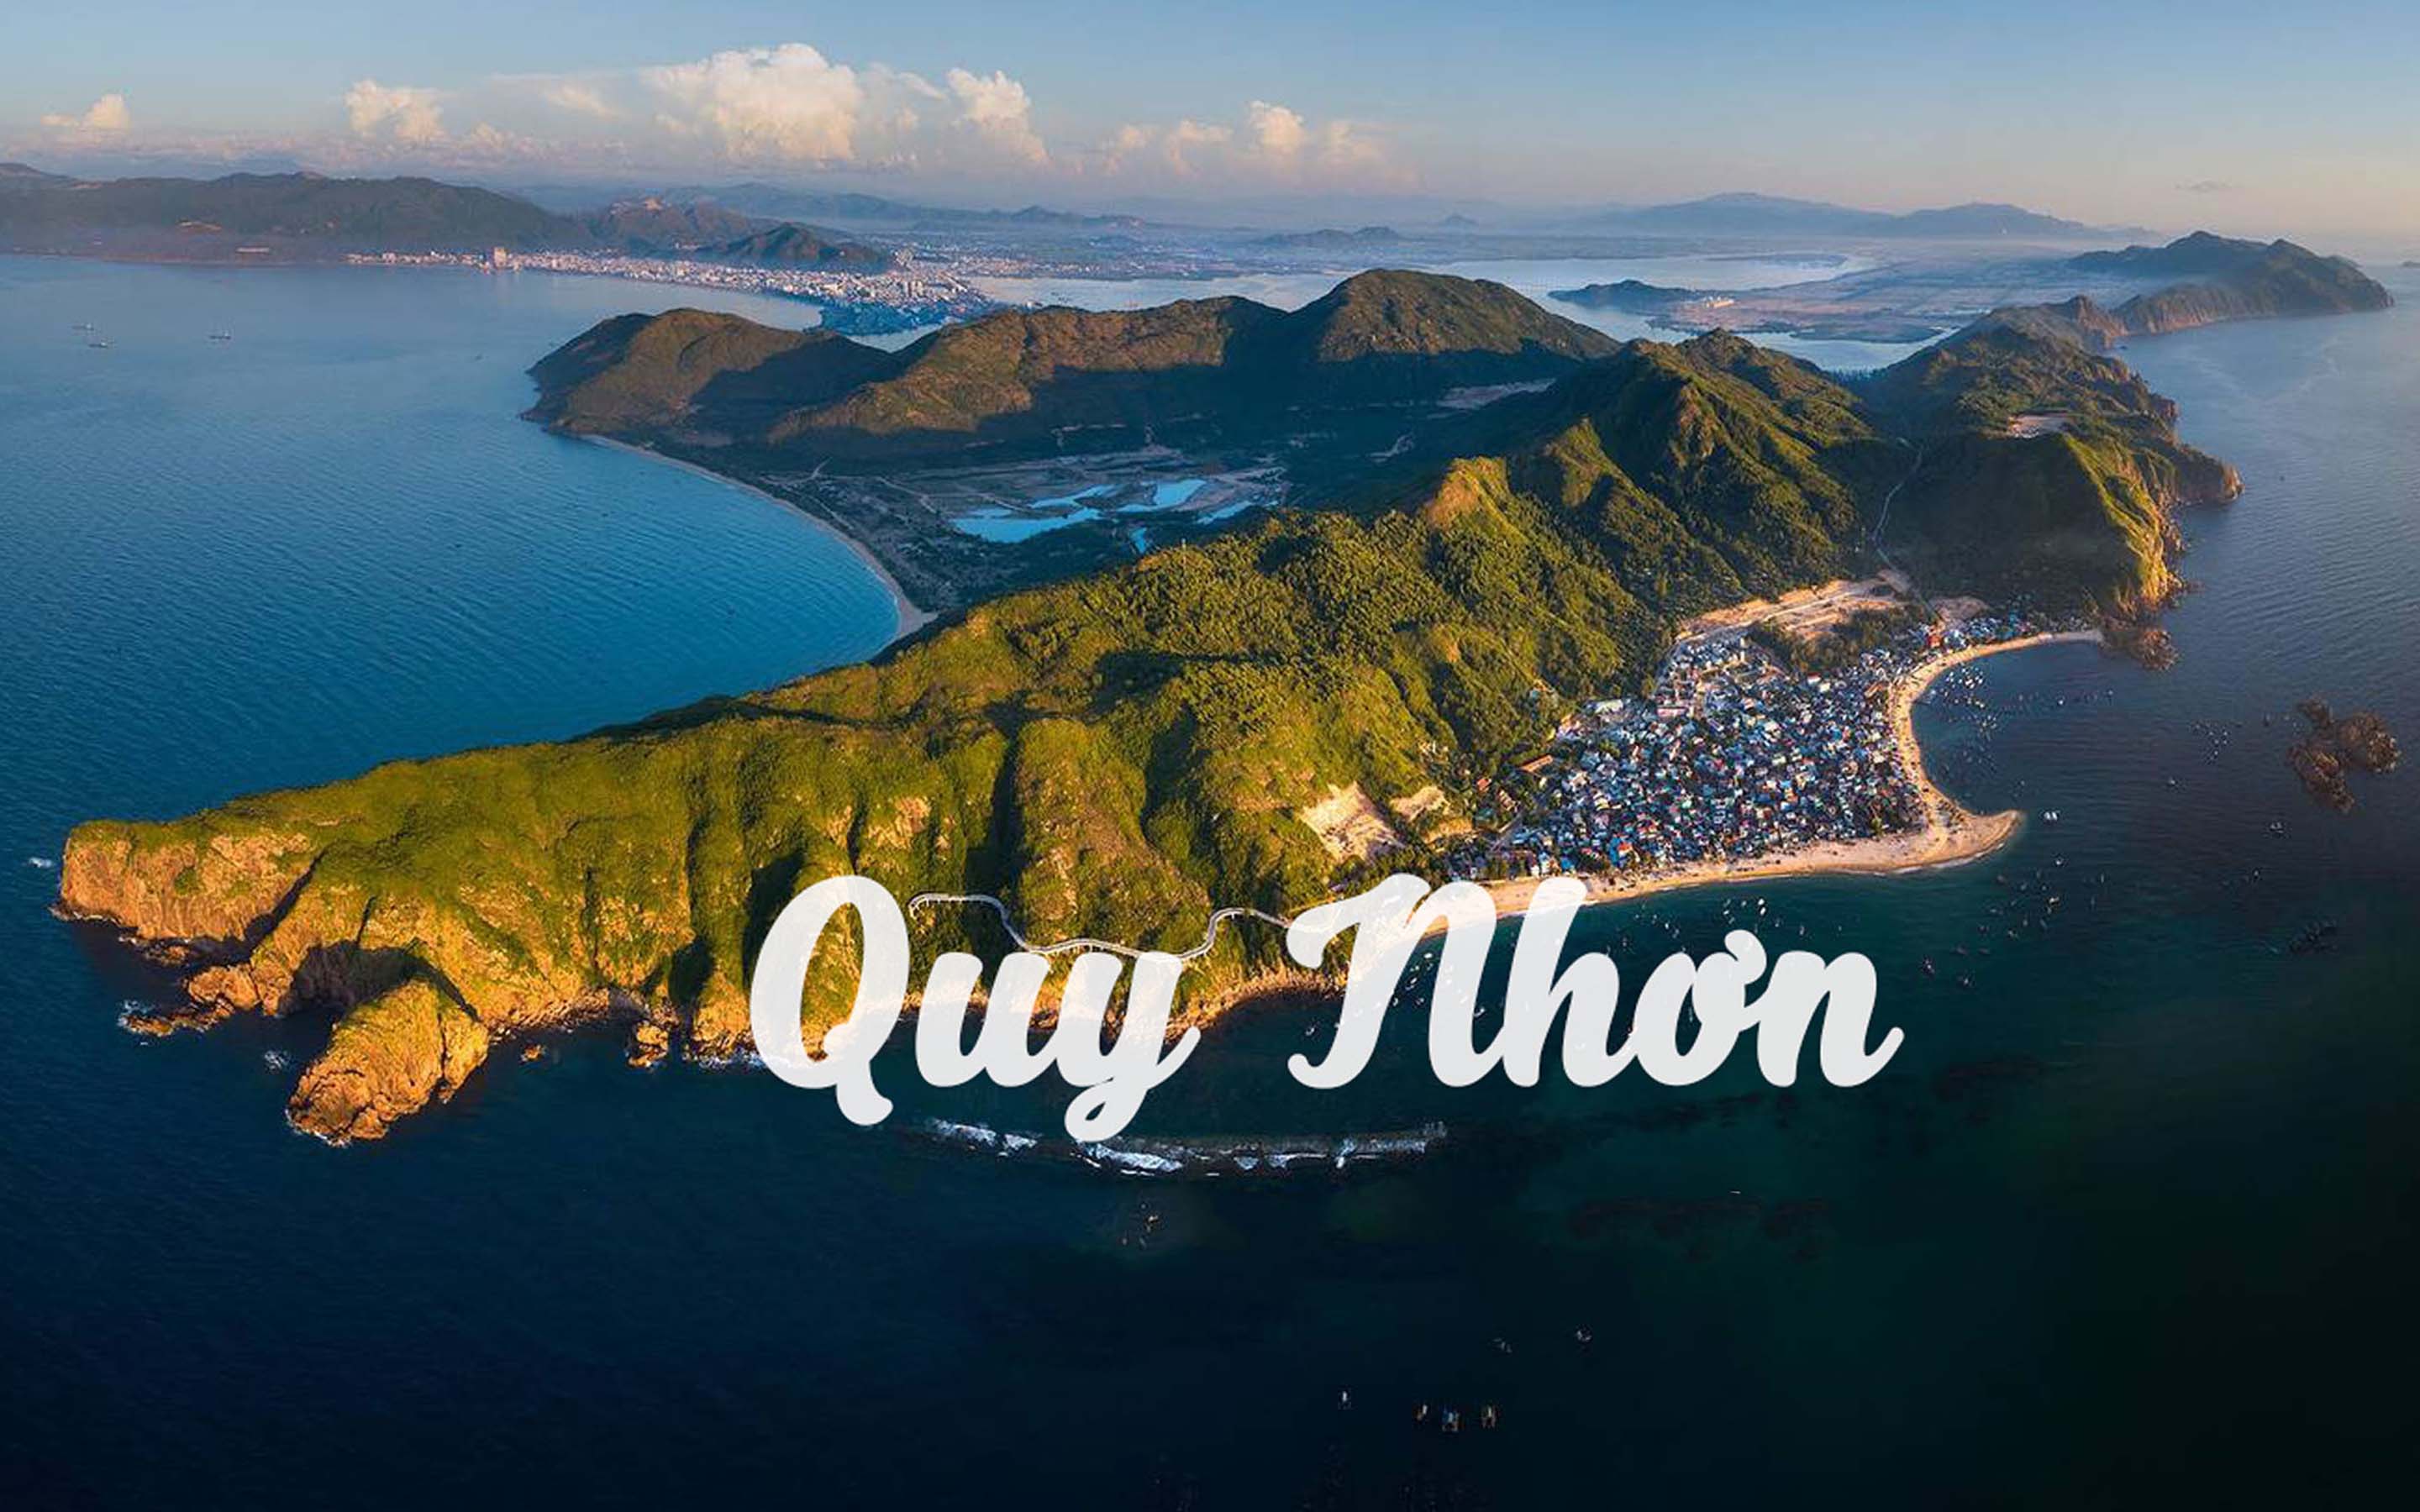 Beach holidays in Quy Nhon Viet Nam - a perfect getaway for anyone who is a nature lover